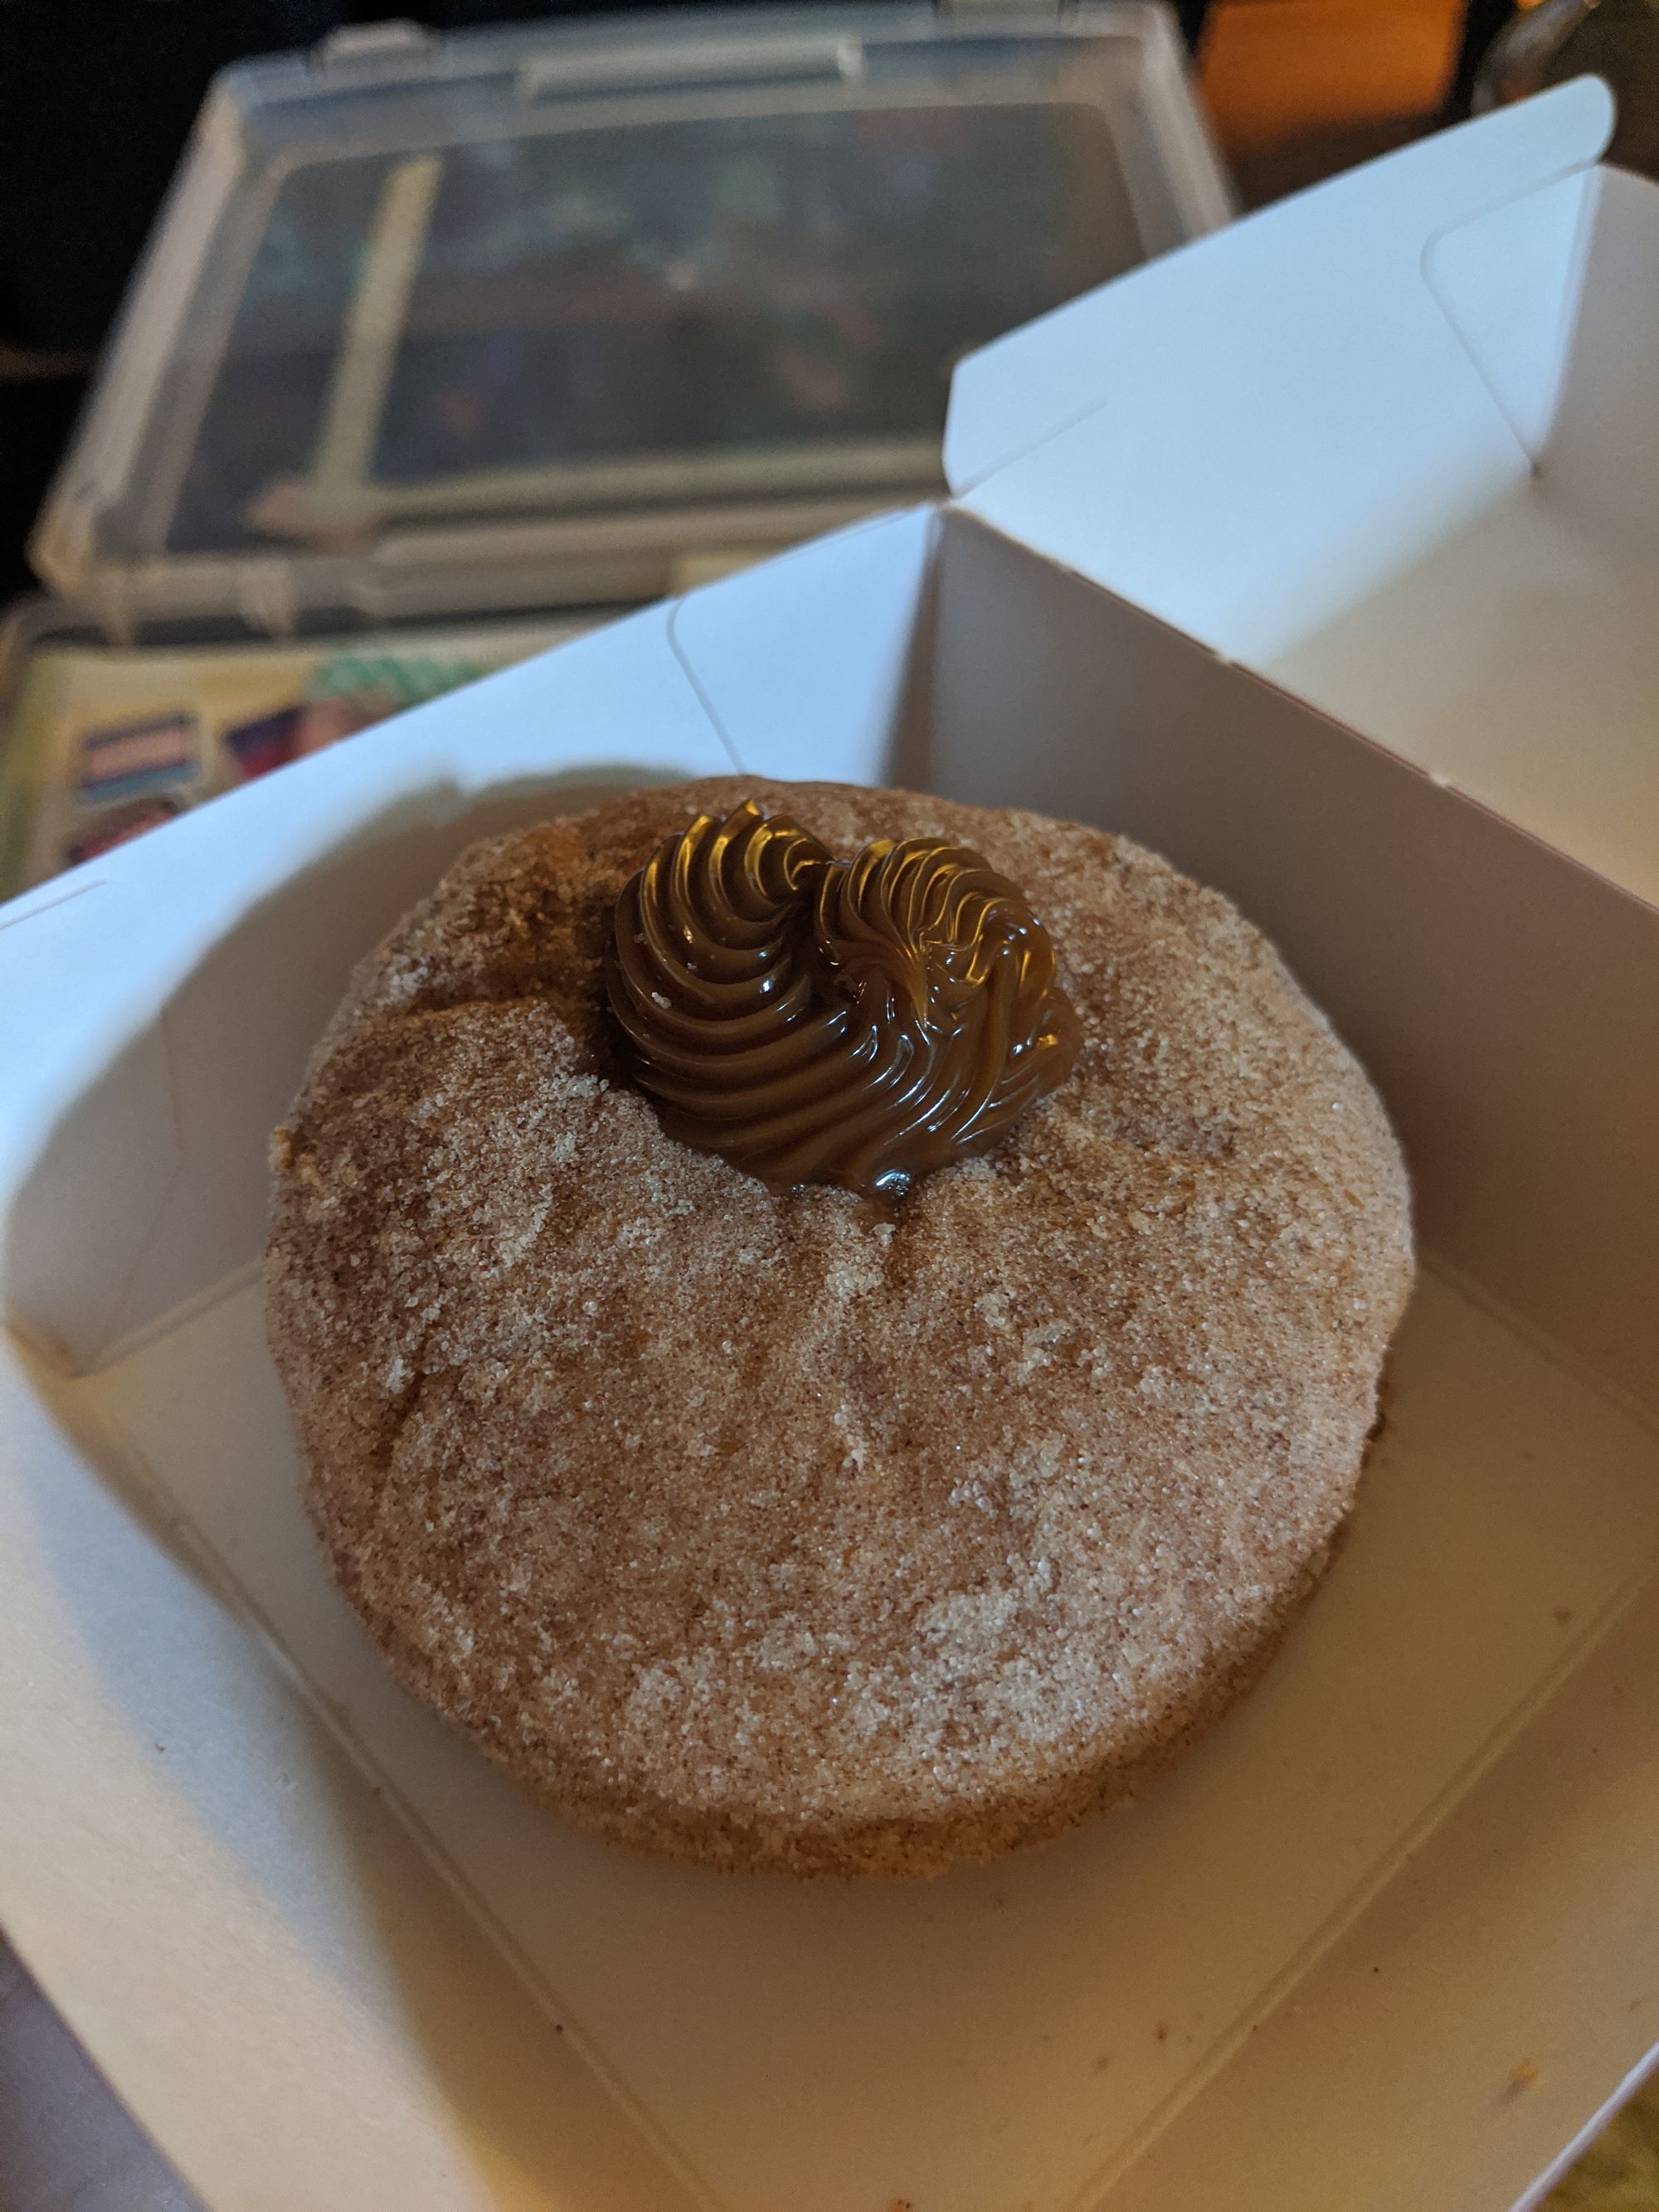 A circular donut, with a dollop of icing where the center hole would be.The entire thing is coated in cinnamon sugar.